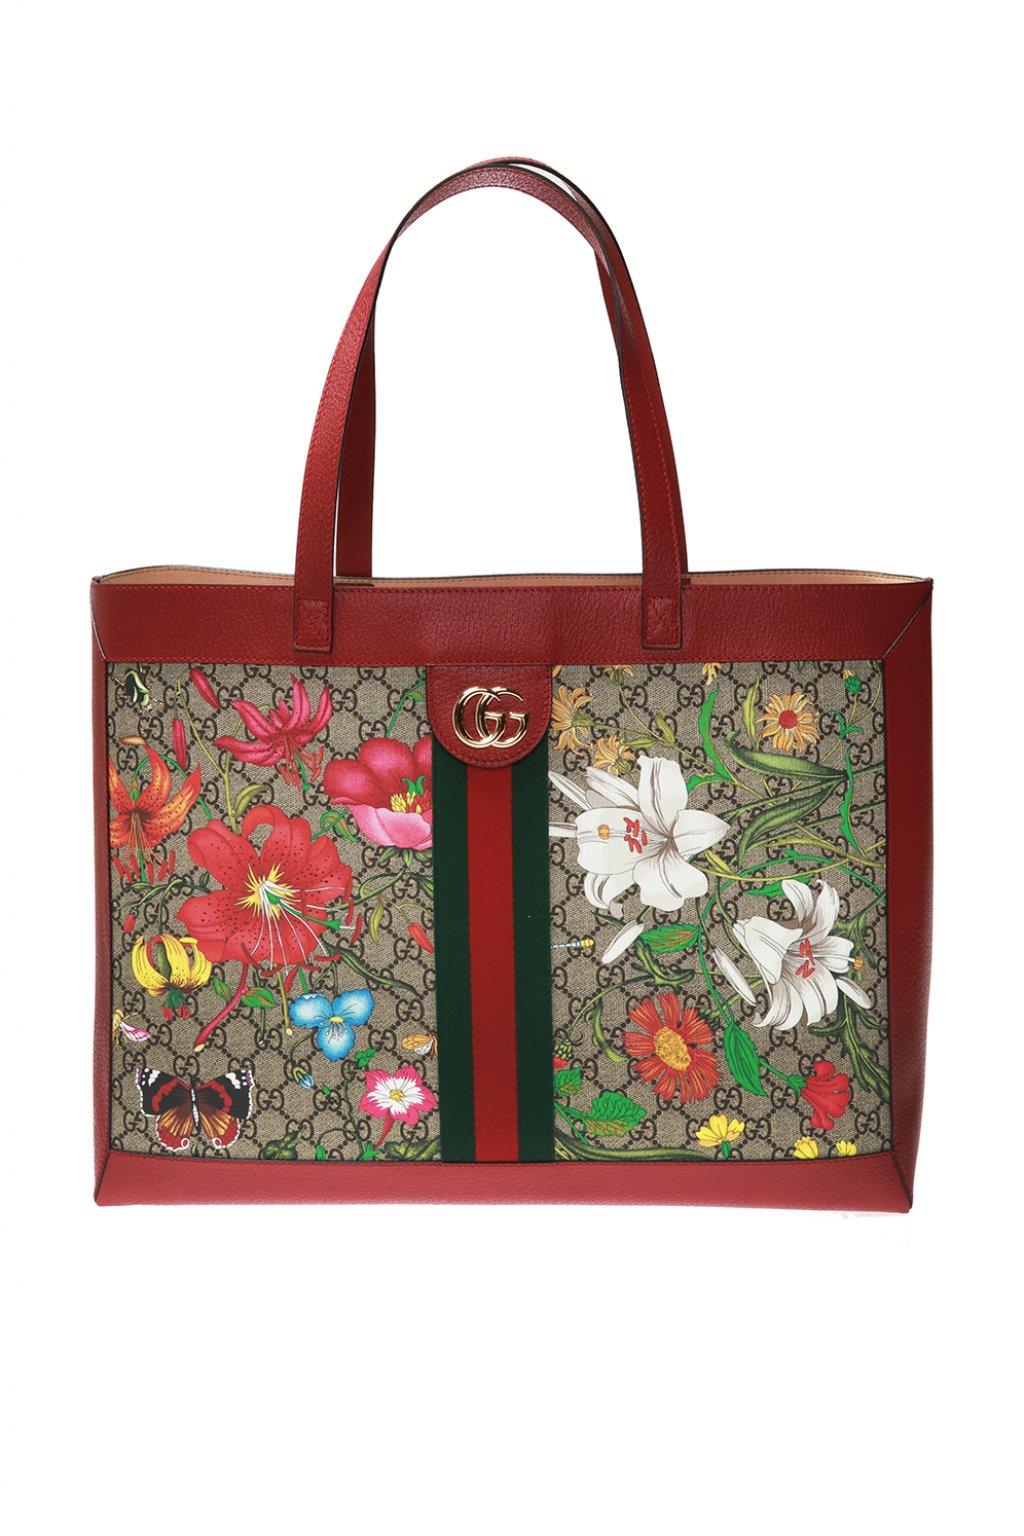 Gucci Ophidia Floral And GG Supreme Tote in Red | Lyst